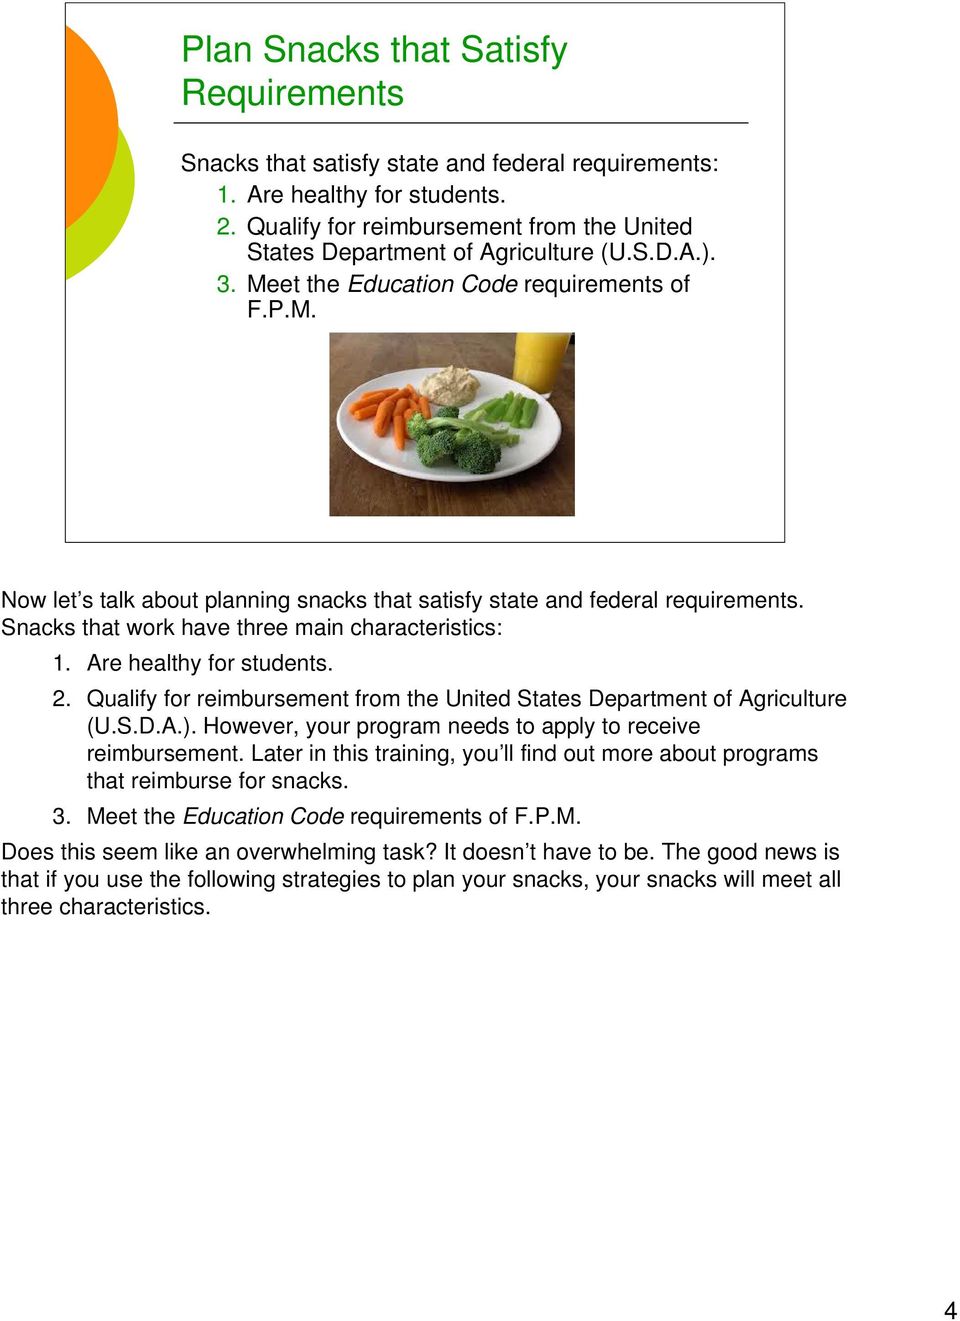 Are healthy for students. 2. Qualify for reimbursement from the United States Department of Agriculture (U.S.D.A.). However, your program needs to apply to receive reimbursement.